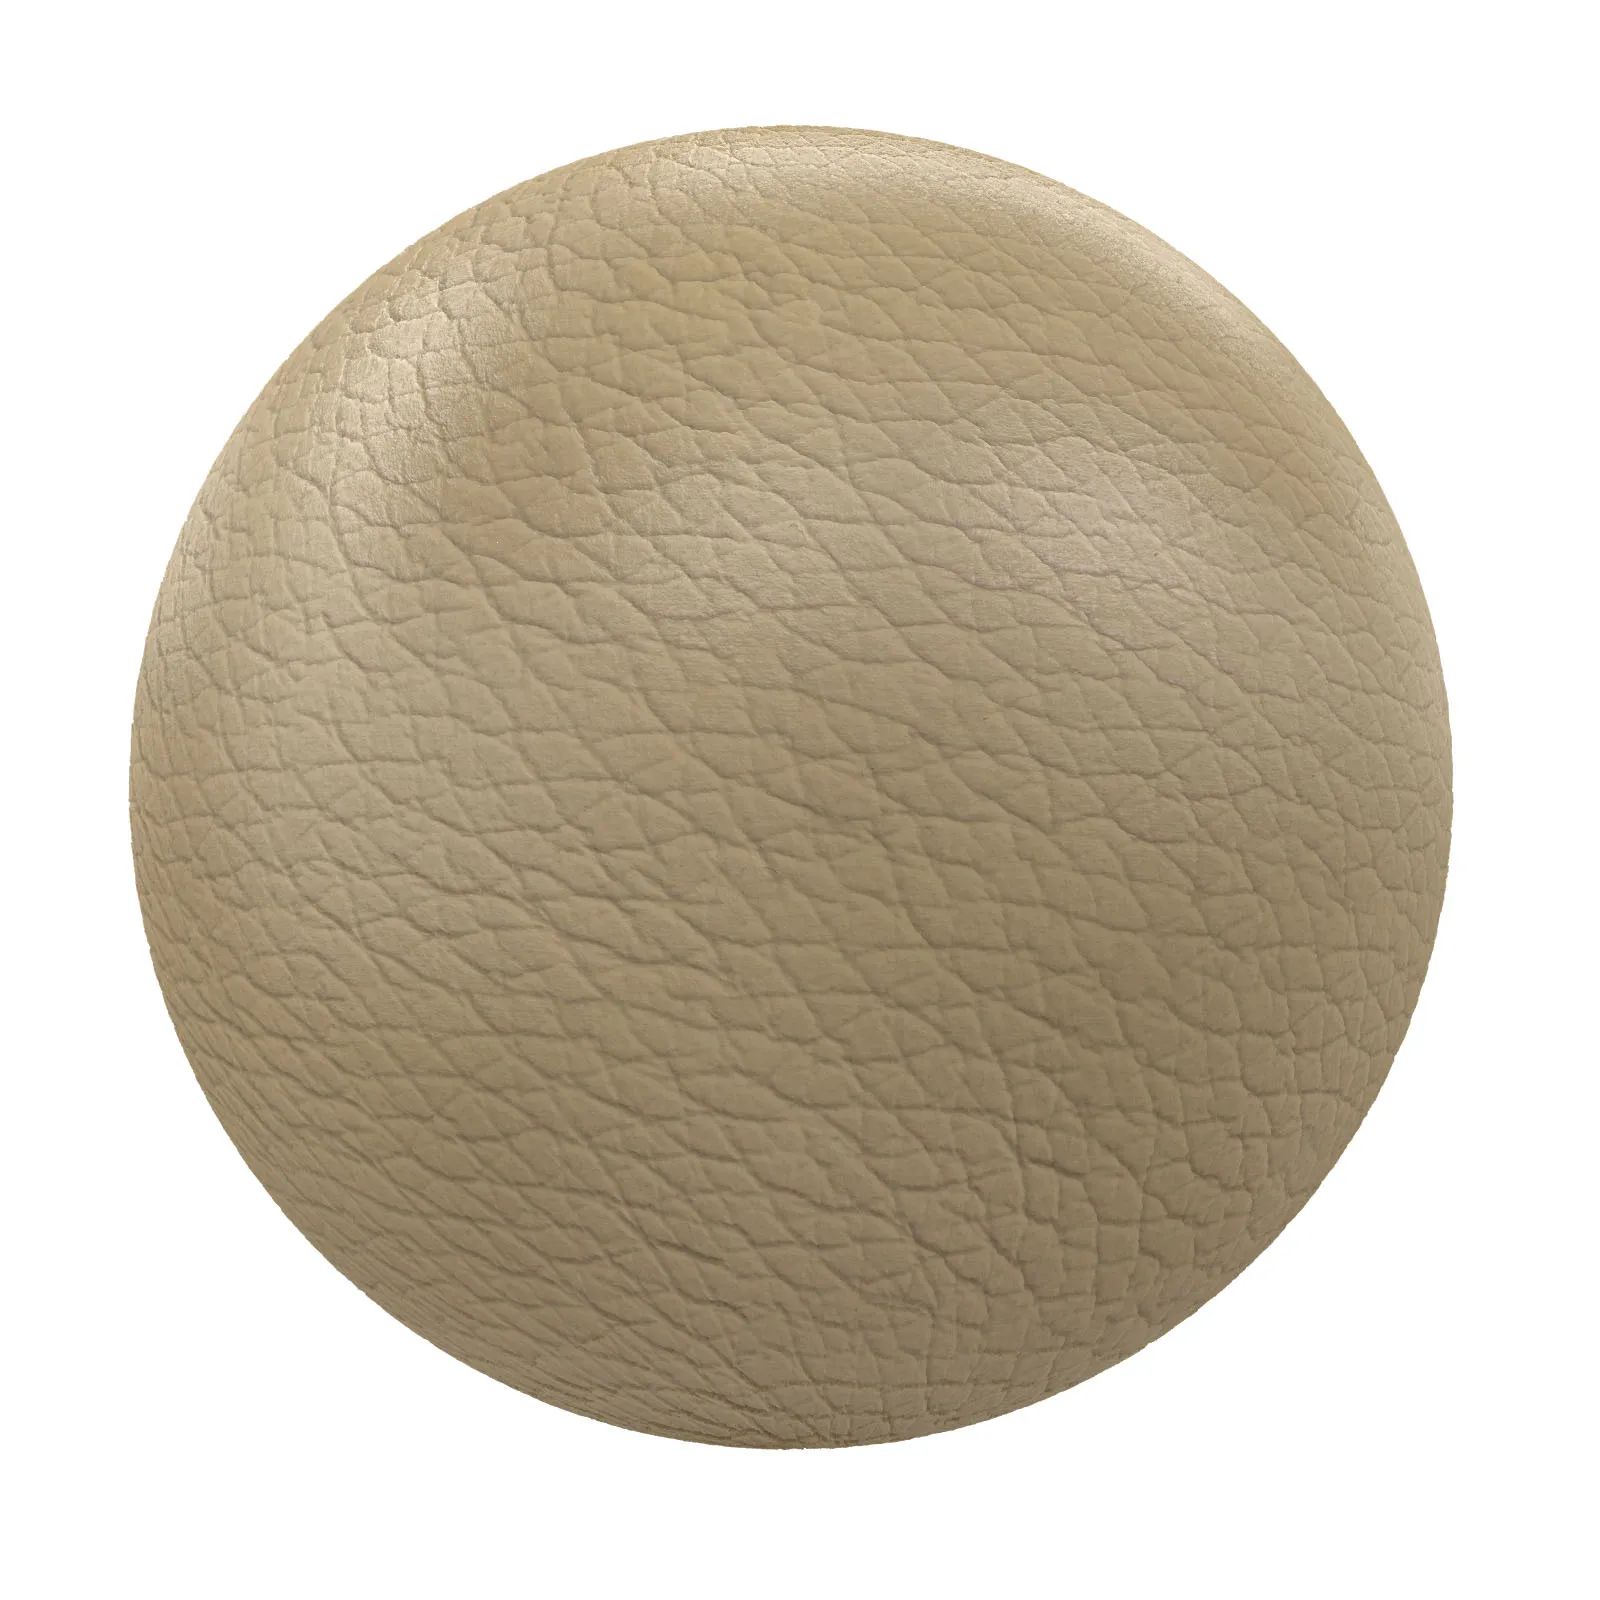 PBR CGAXIS TEXTURES – LEATHER – Beige Leather 5